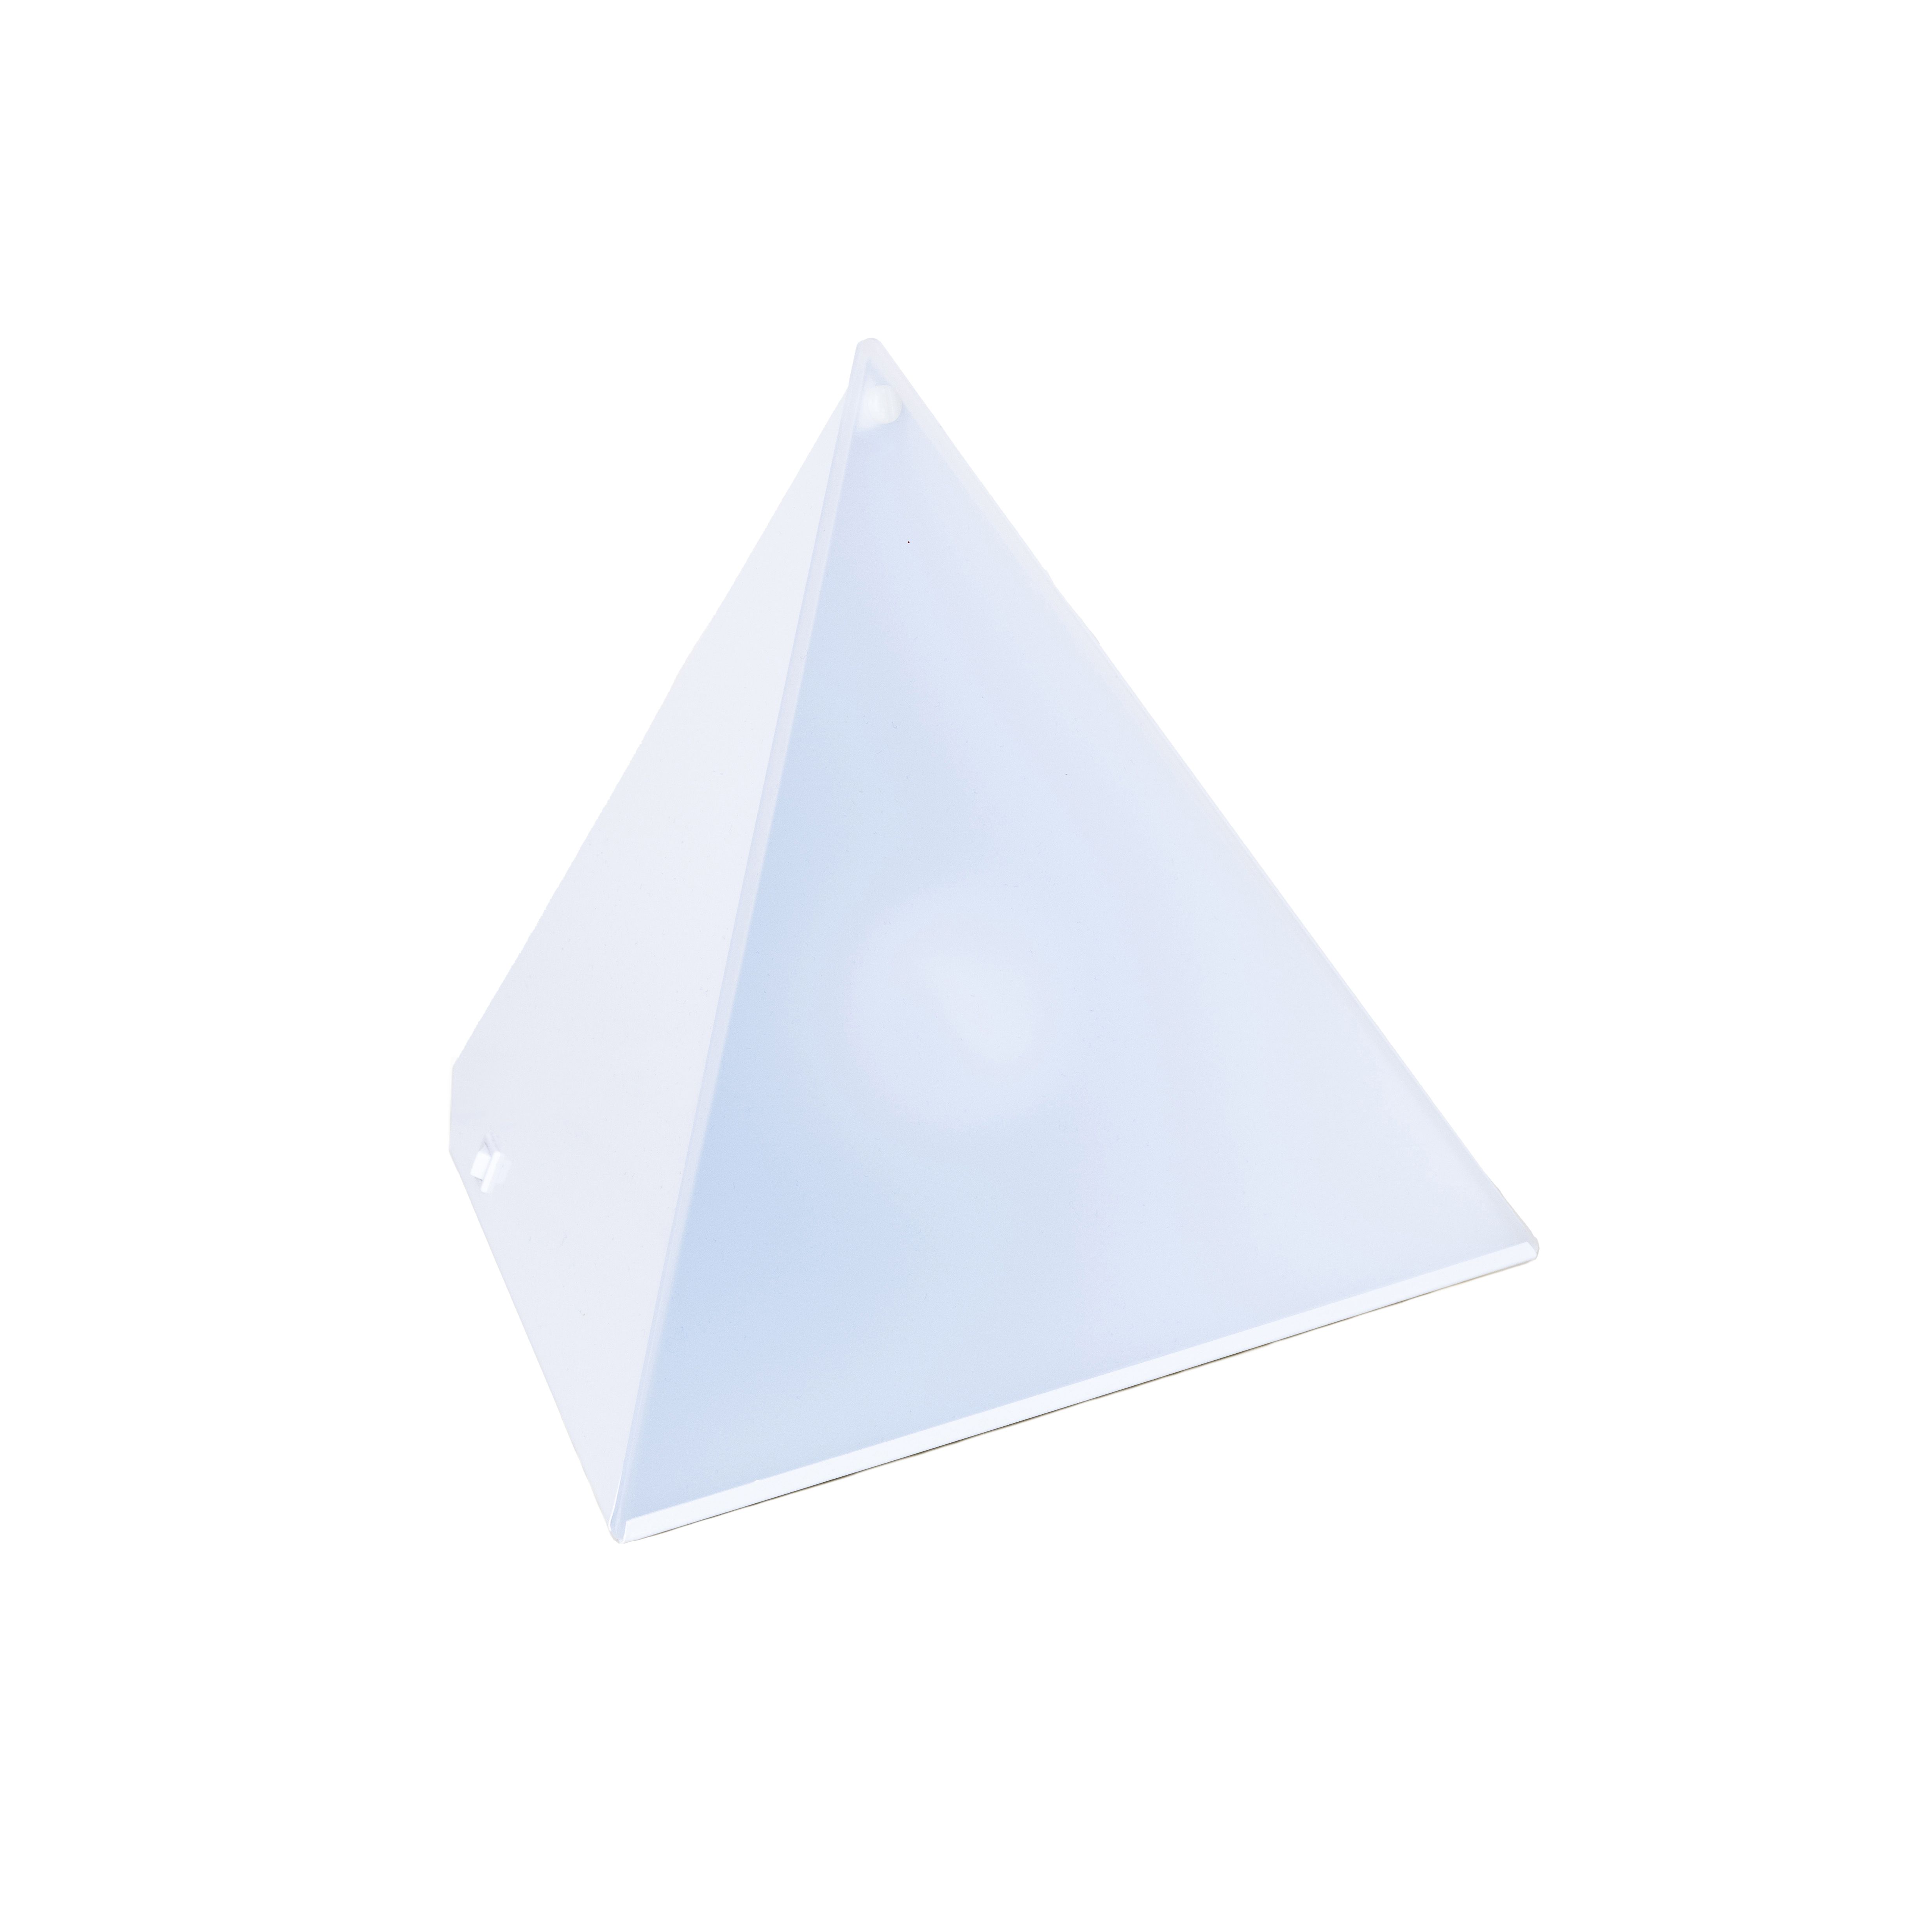 Picture of Northern Light Technologies NLT-LUX Luxor Therapy Pyramid Table Lamp